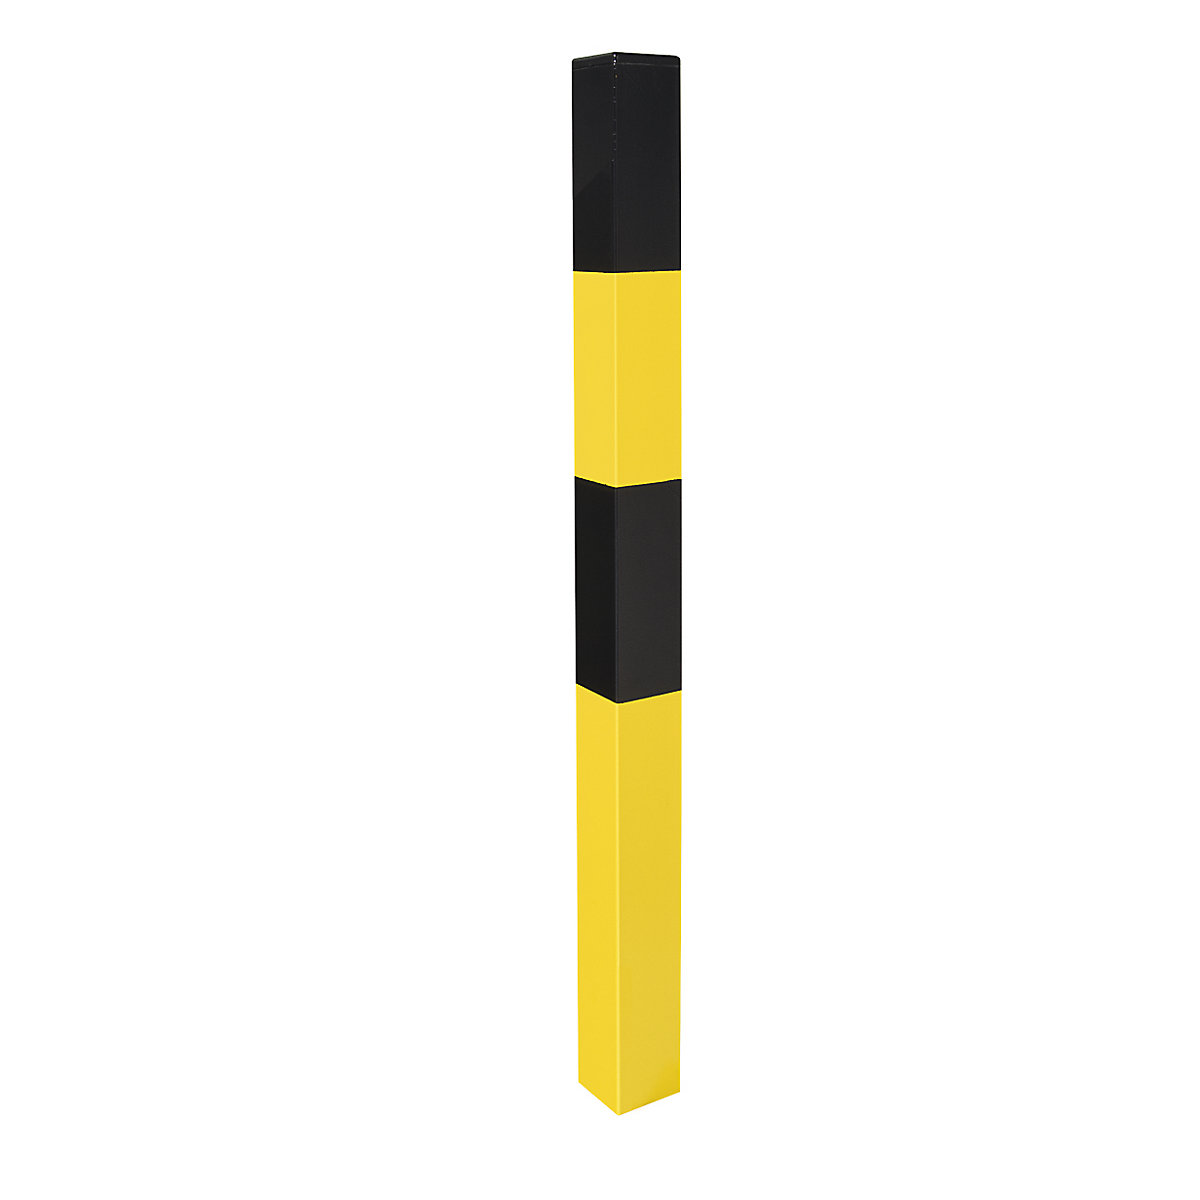 Barrier post, for setting in concrete, 70 x 70 mm, painted black/yellow, 1 eyelet-3